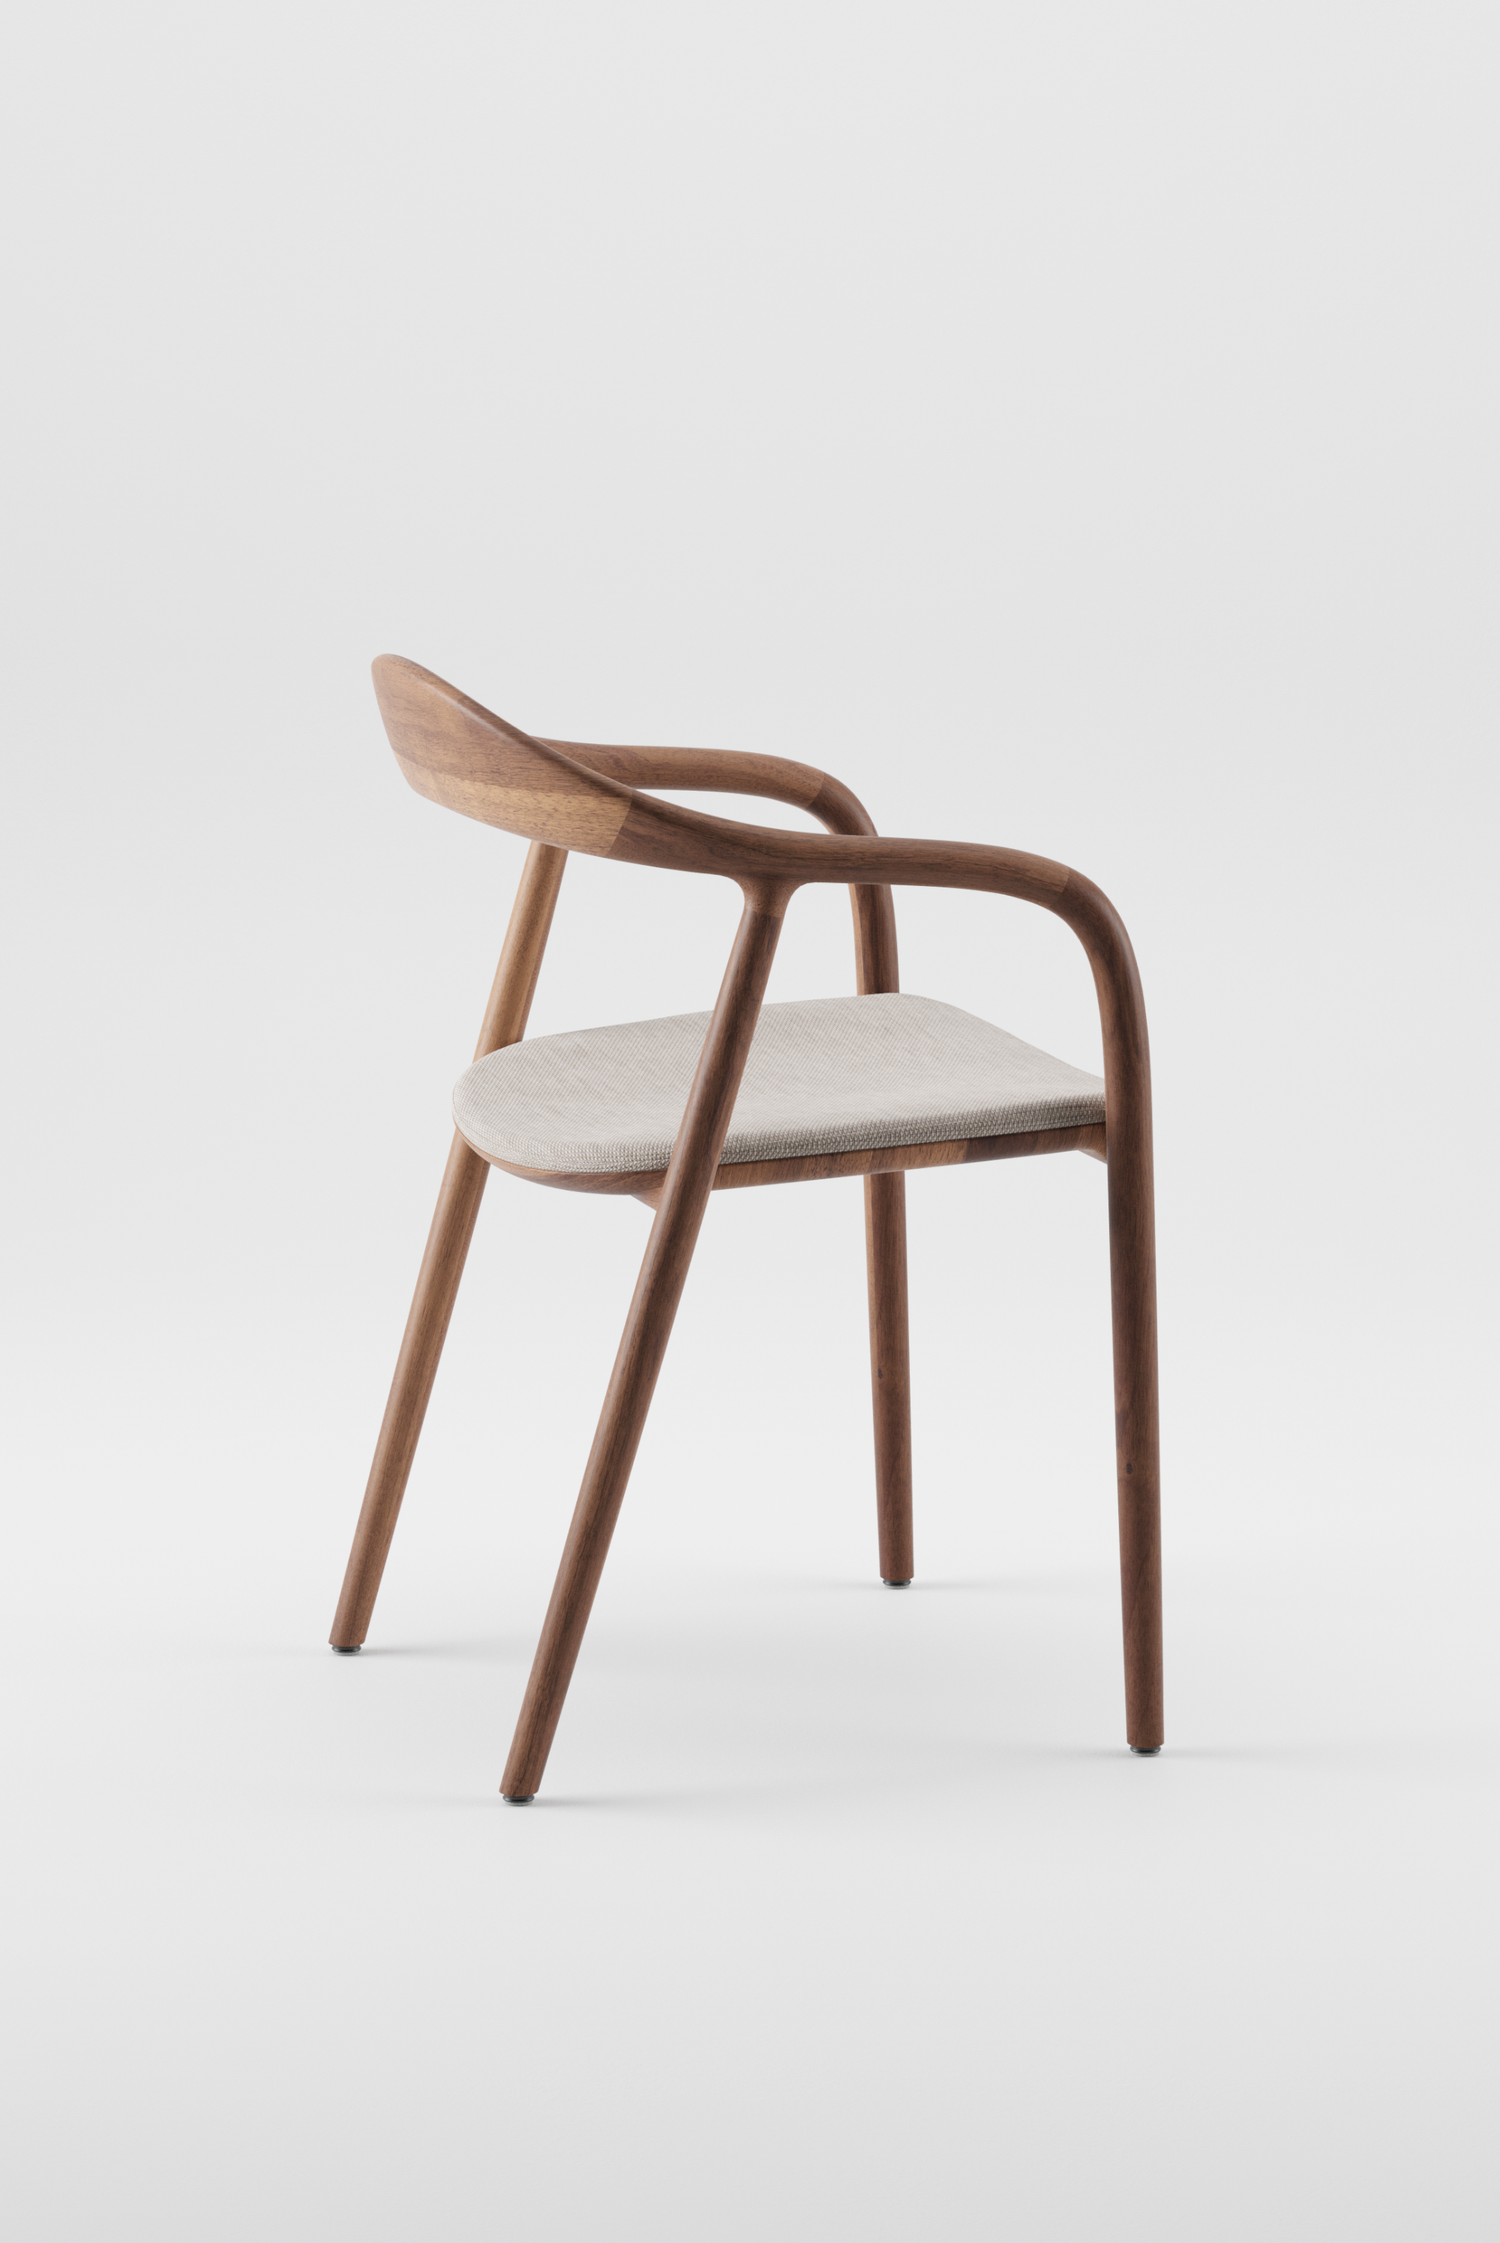 The Neva Chair in European Walnut with Upholstered seat by Artisan